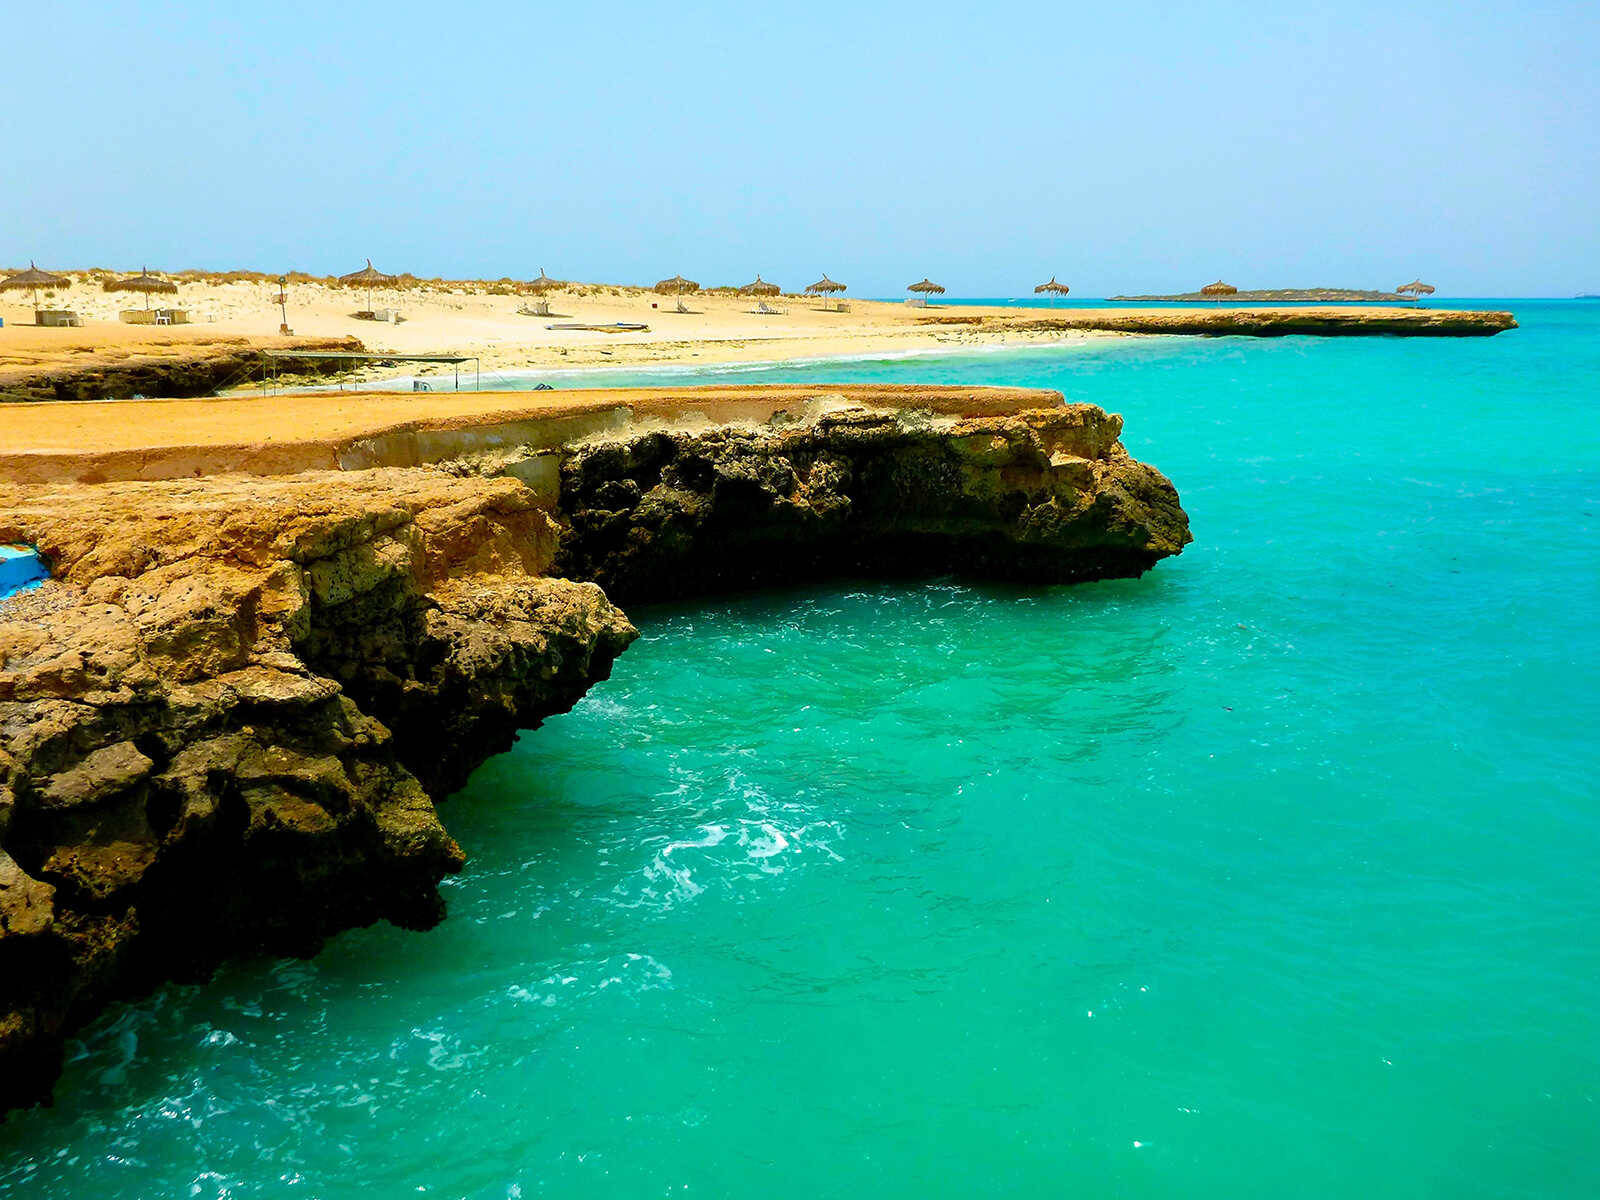 Djiboutiis A Country Located In The Horn Of Africa And Moucha Island Is An Island Nearby. Sfondo